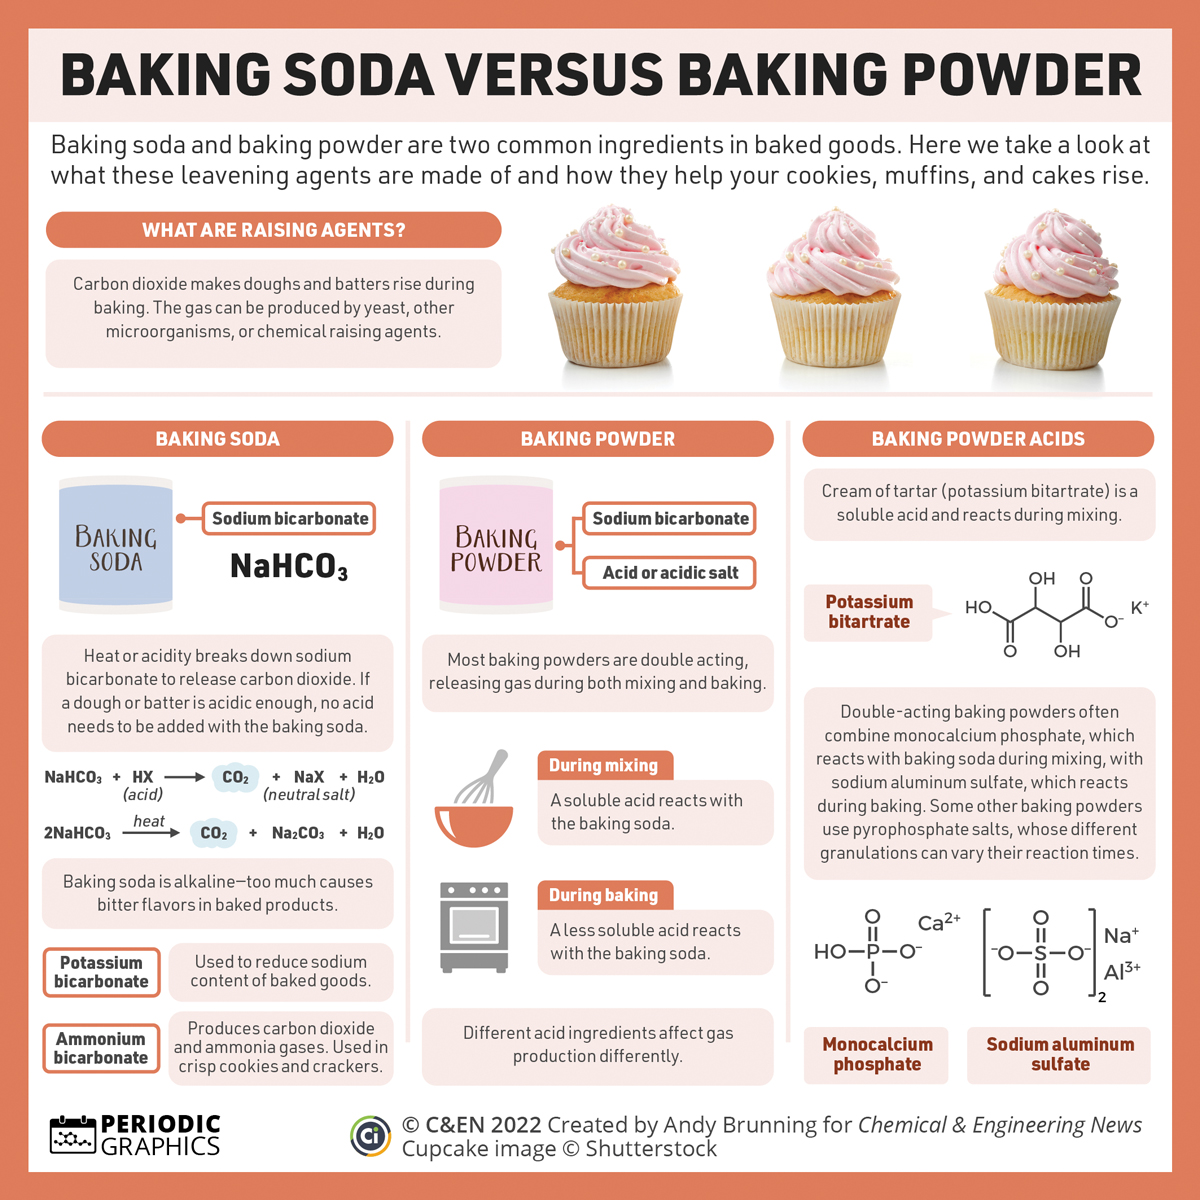 What's the Difference Between Baking Powder and Baking Soda?